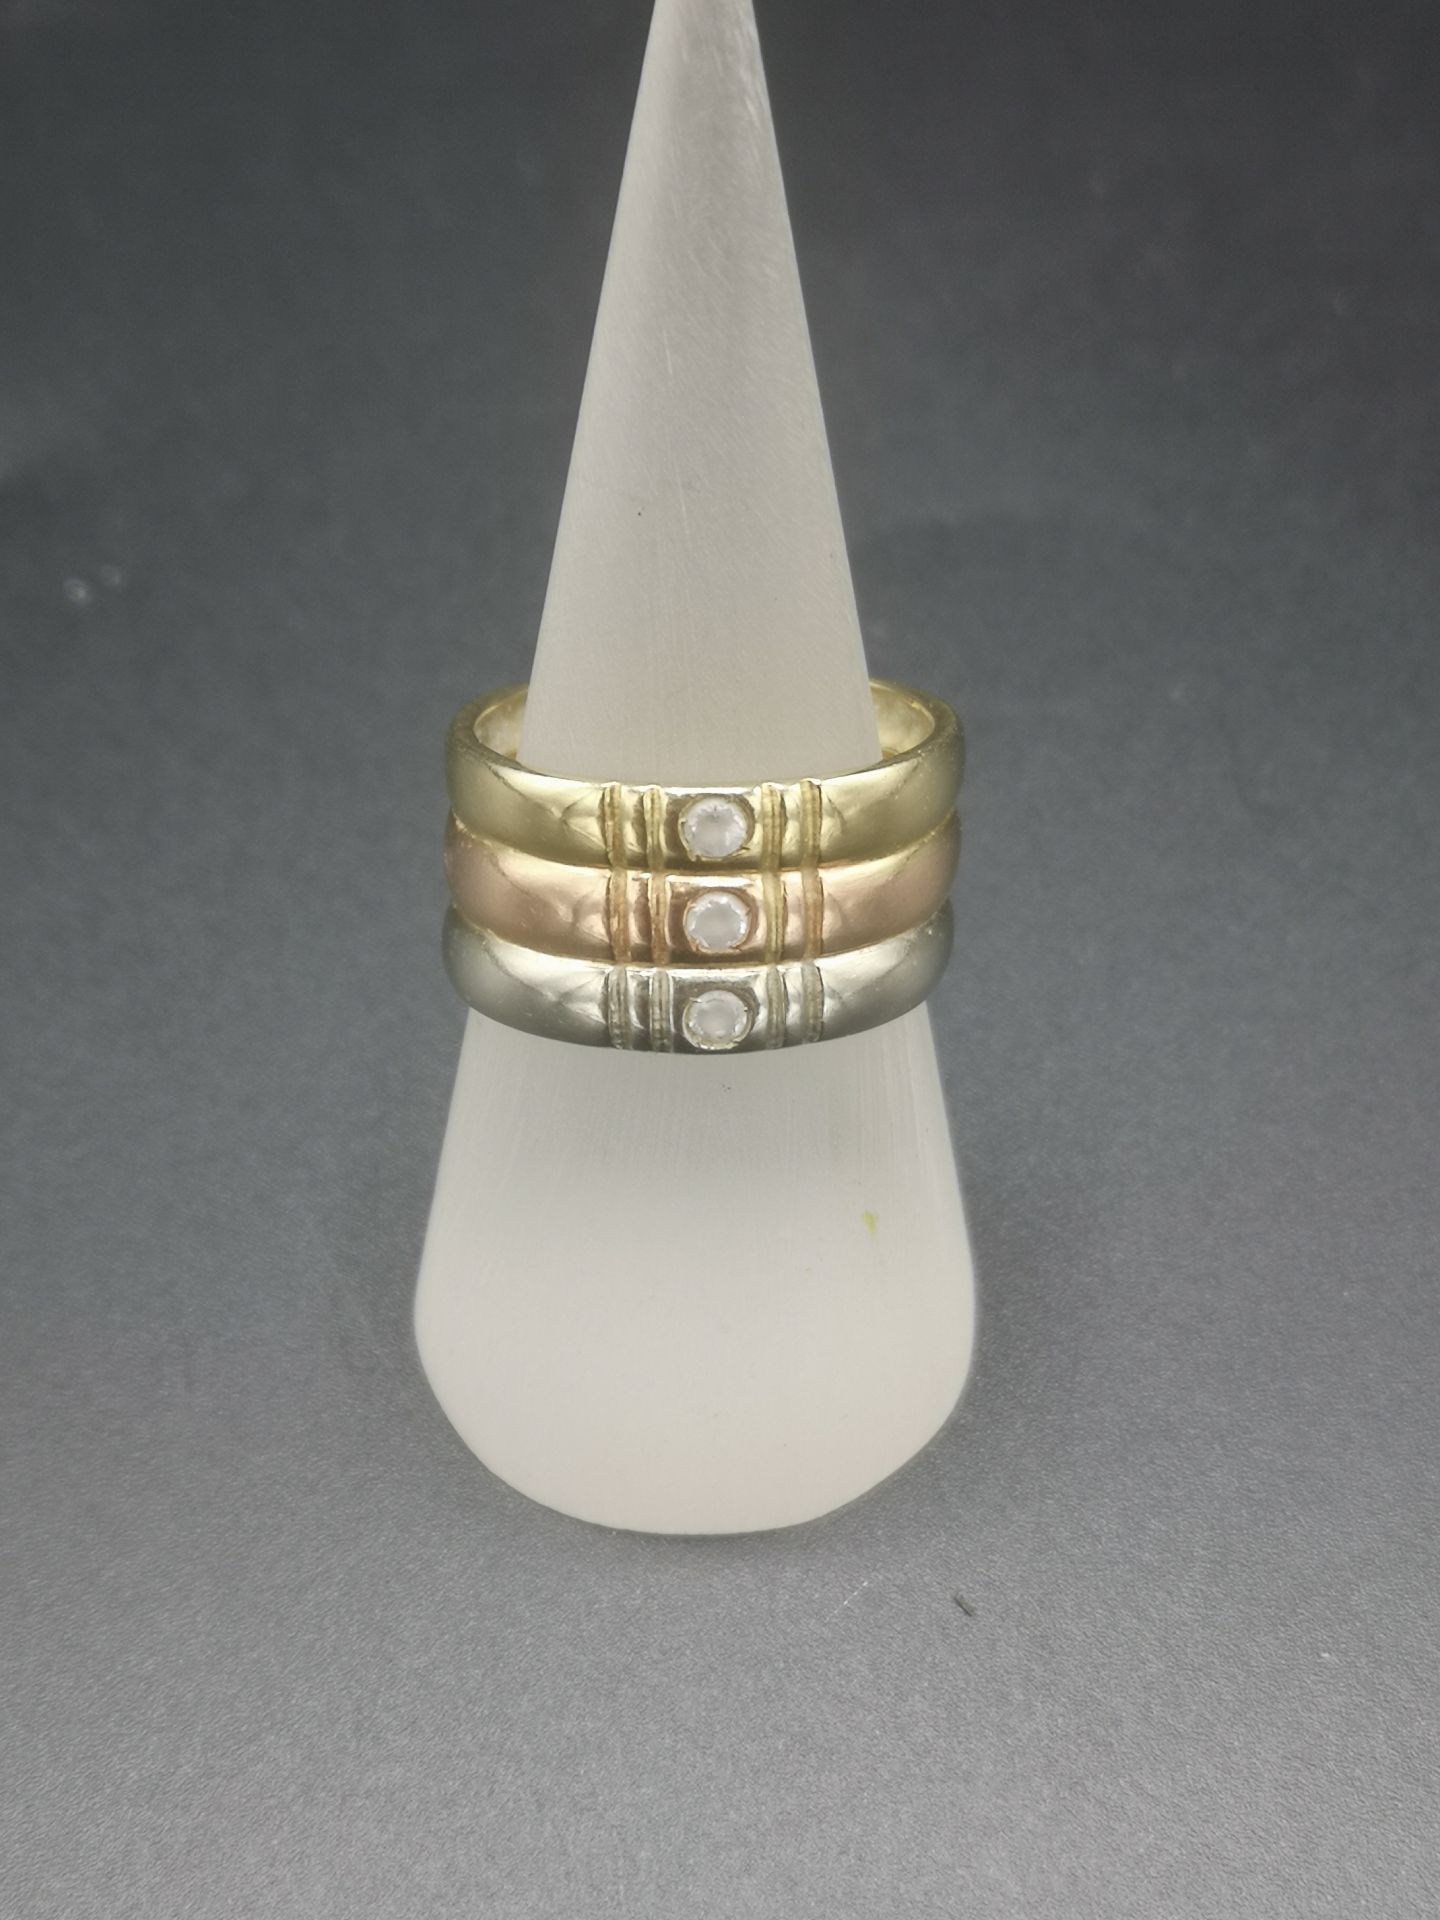 14ct white, rose and yellow gold band - Image 2 of 4